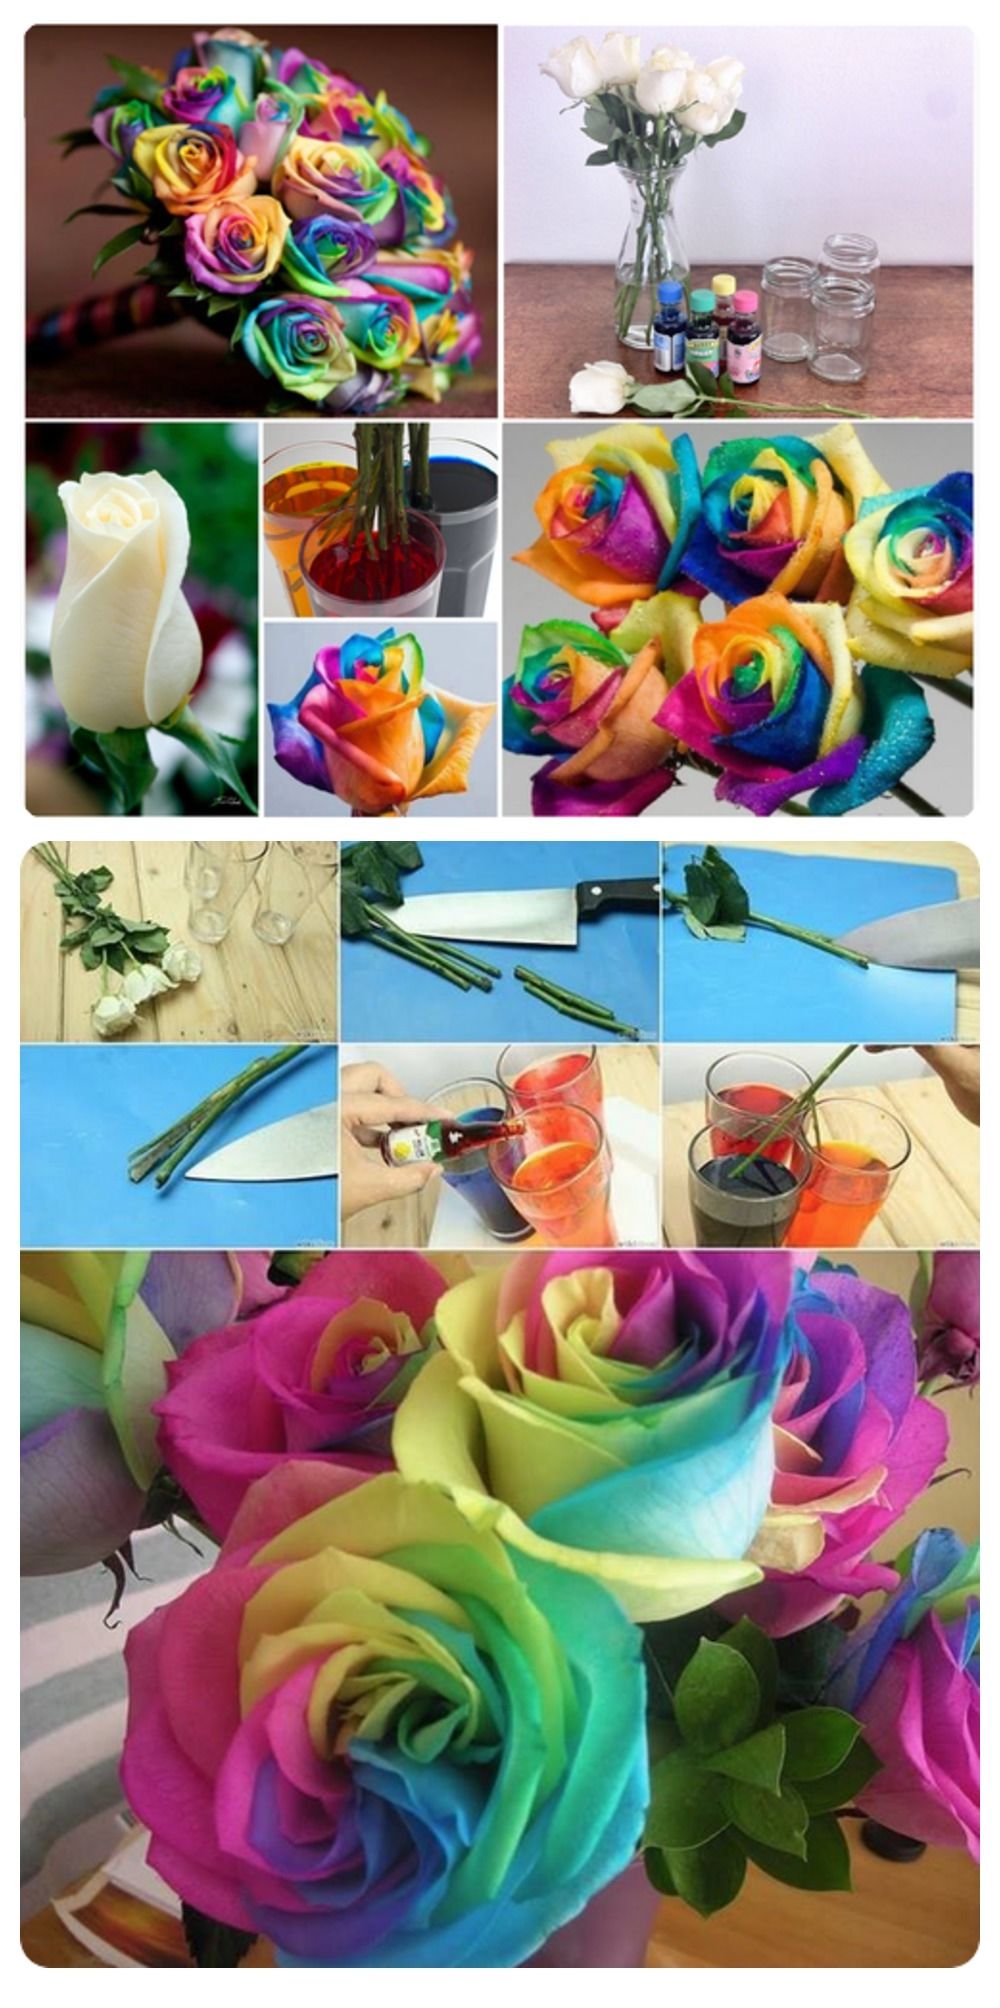 How To Make Rainbow Flowers - Step By Step How To Make Rainbow Flowers - HD Wallpaper 